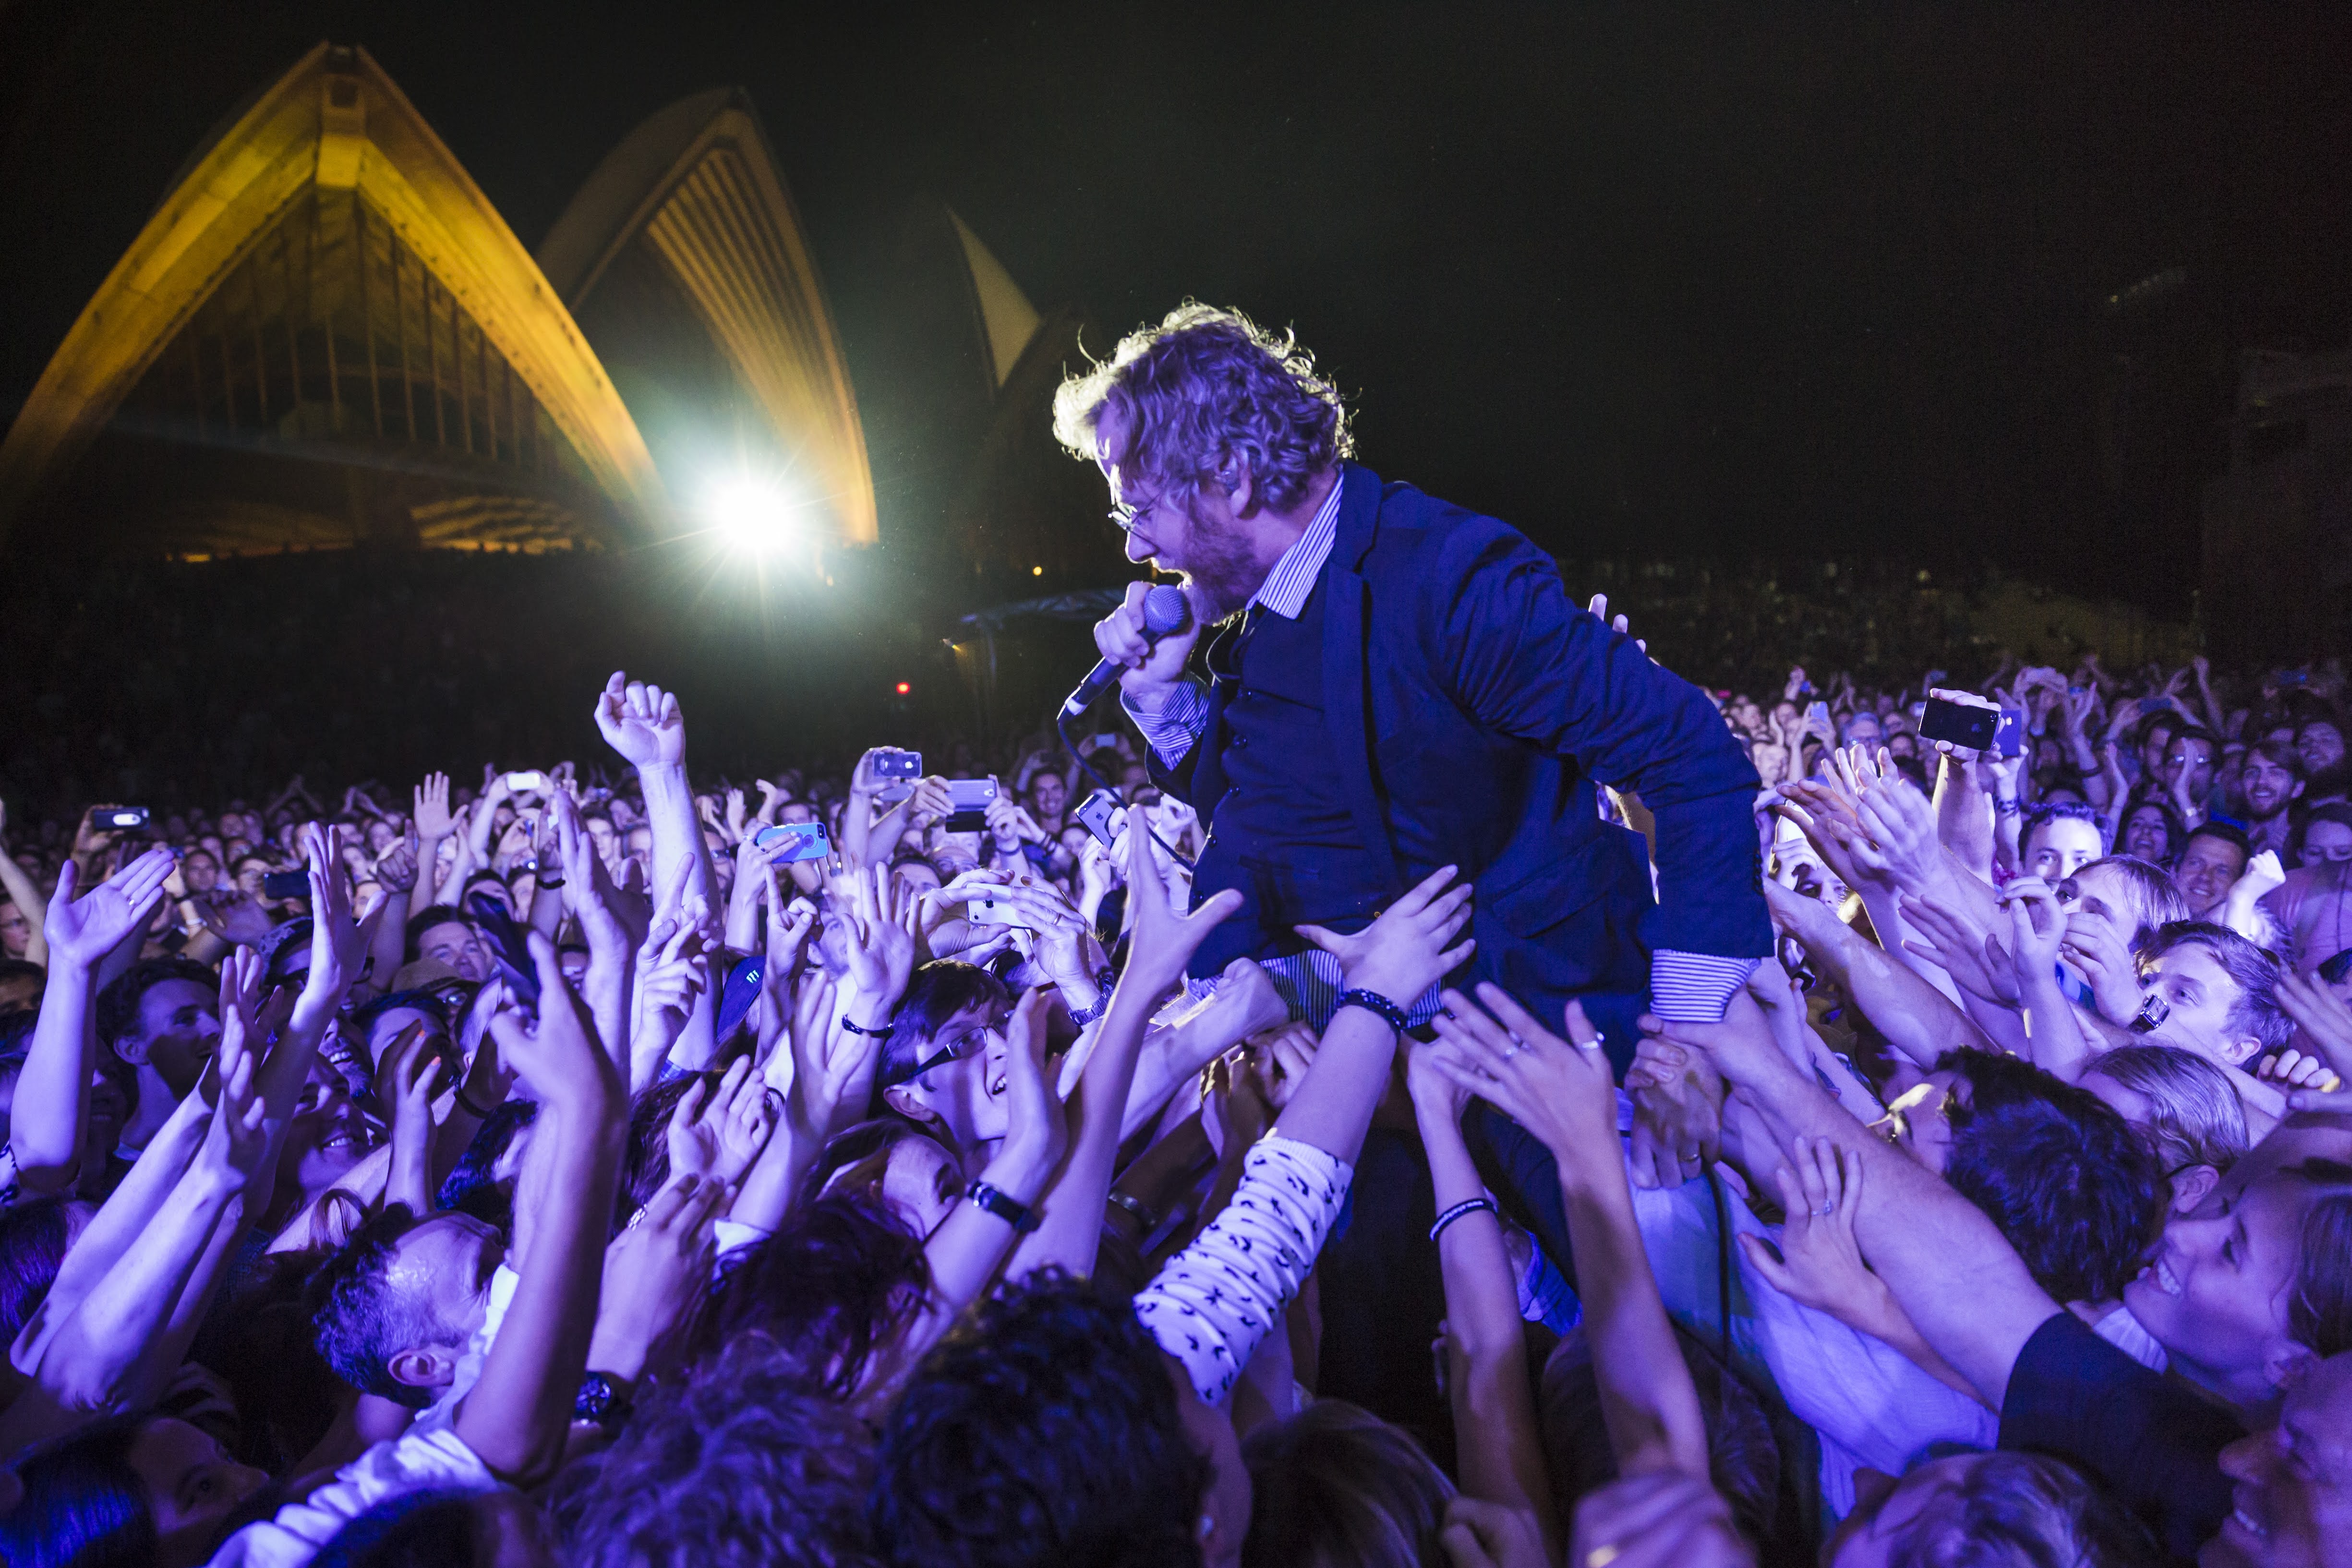 A man singing as the crowd lifts him up.